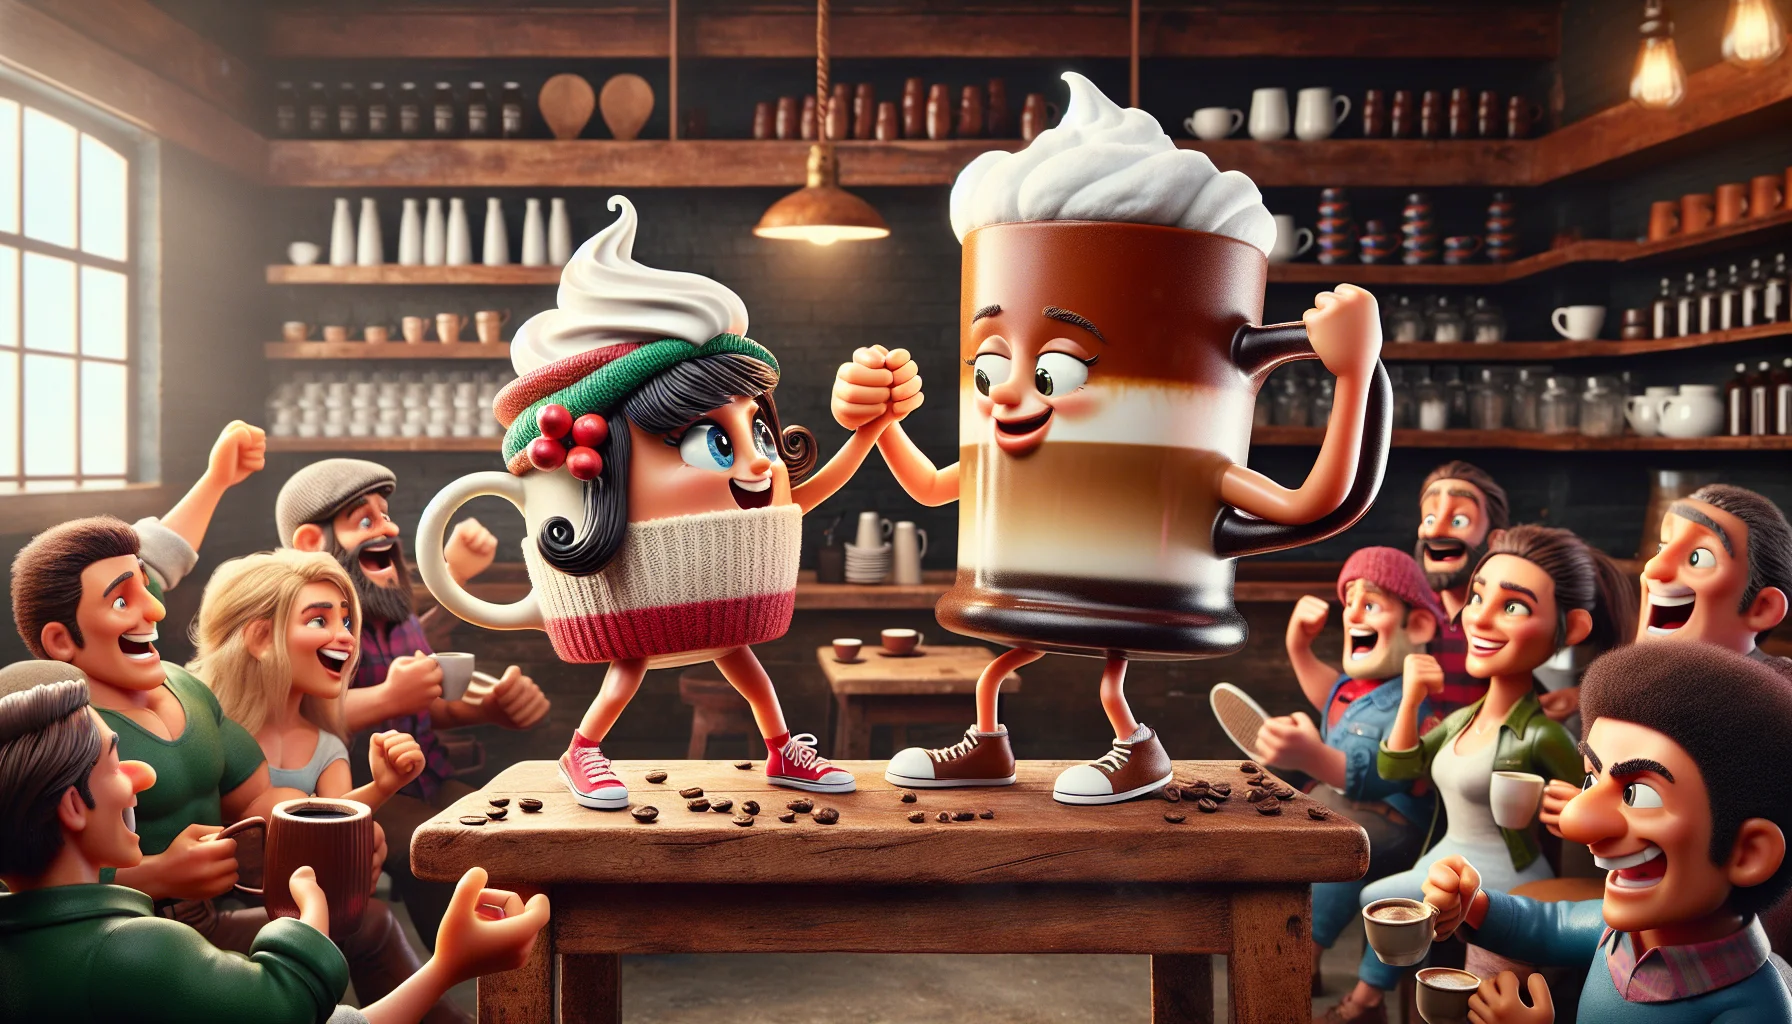 A lively scene taking place at a charming, rustic coffee shop. On the left, there's a tiny jovial cup of espresso breve symbolized as a lively and petite female character of Hispanic descent with a dollop of foam as a stylish hat. On the right, a much taller latte mug portrayed as an amiable and tall male character of Caucasian descent, wearing a rich and steaming creamy milk as a fluffy cardigan. They are engaged in an exaggerated arm-wrestling match atop a wooden table, giving a look of friendly rivalry. The background is filled with coffee enthusiasts of various races and genders, cheering for their favorite coffee type.